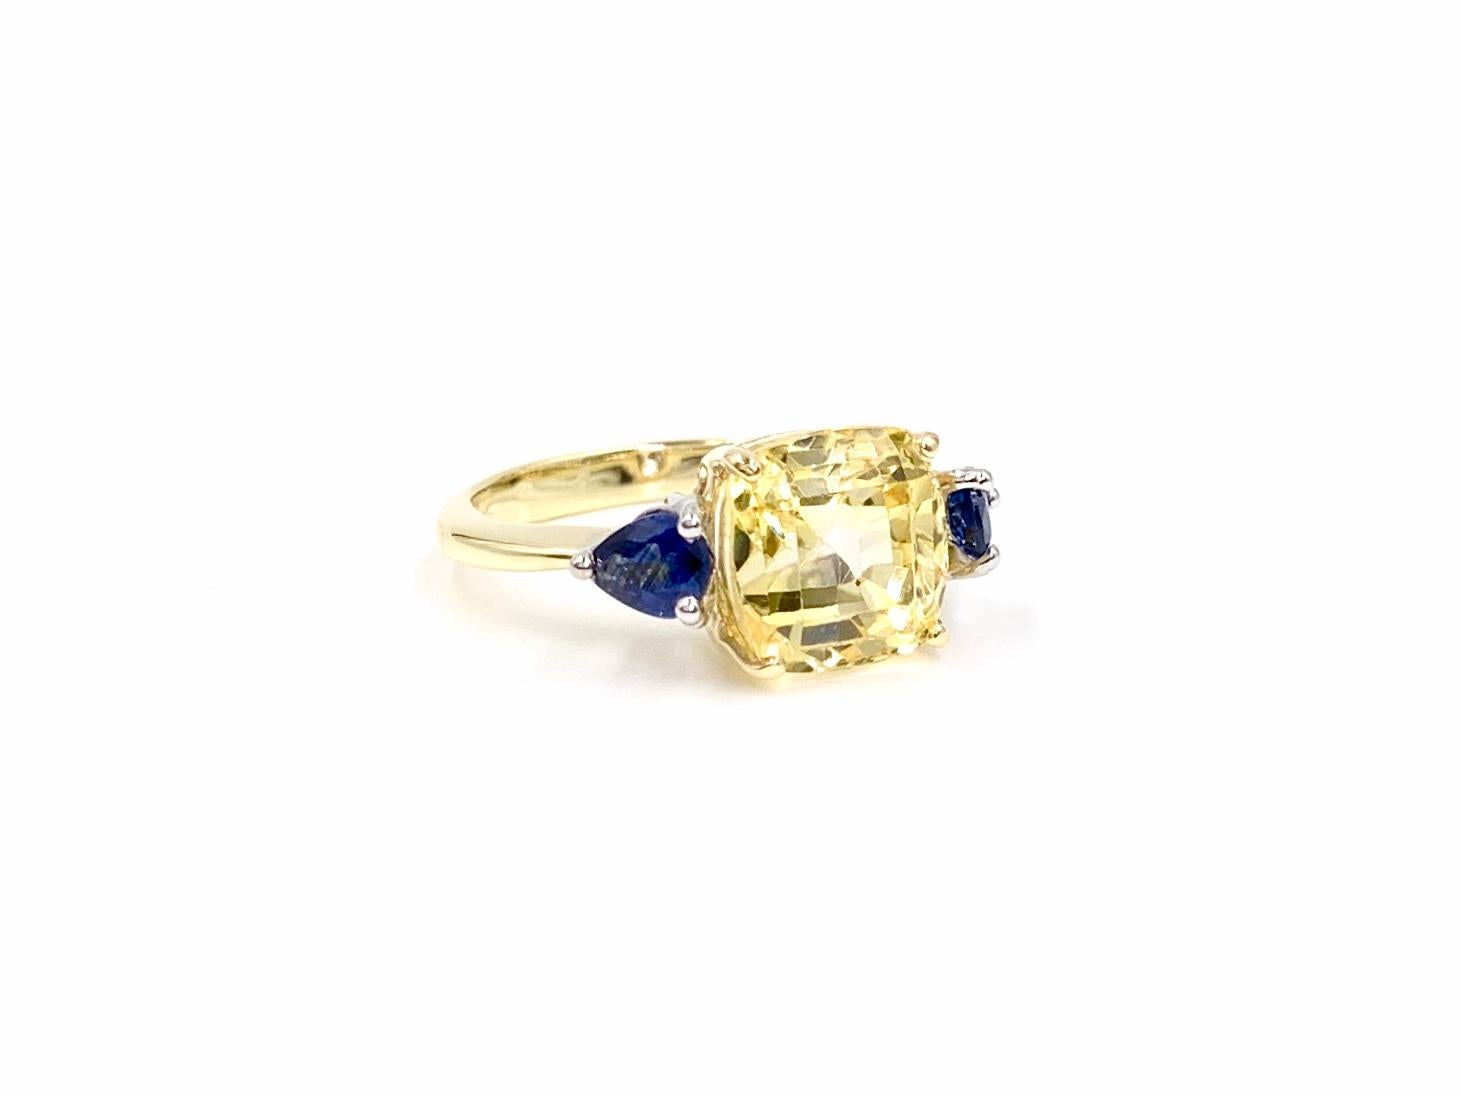 A beautiful 14 karat two tone three stone style mounting features a well saturated and vibrant 7.88 carat cushion cut yellow sapphire resting between two pear shape blue sapphires at .81 carats total weight. Blue sapphires are set in individual